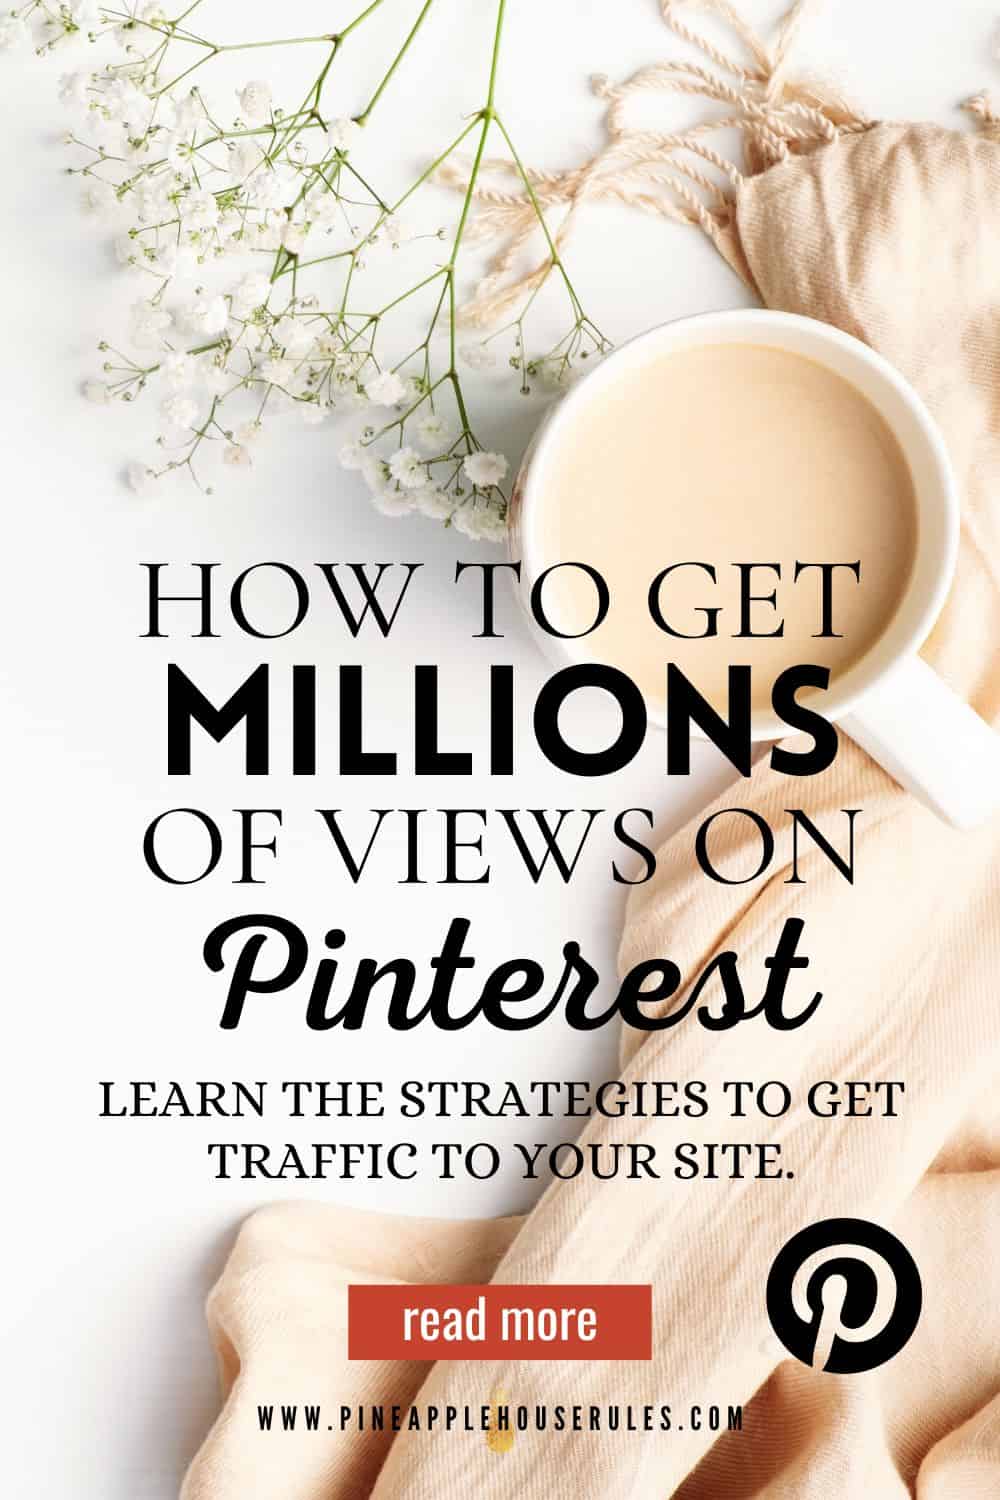 How to Get Millions of Views on Pinterest is a list of instructions and strategies to increase monthly views on Pinterest and therefore get more traffic to your blog, website, or Etsy shop! How to Get Millions of Views on Pinterest | How to Get Millions of Views on Pinterest 2022 | Affiliate Marketing | affiliatemarketingtips | affiliatemarketingoffline | affiliatemarketingbusiness | How to Increase Traffic to Your Website | How to Increase Traffic to Your Blog | How to Increase Traffic